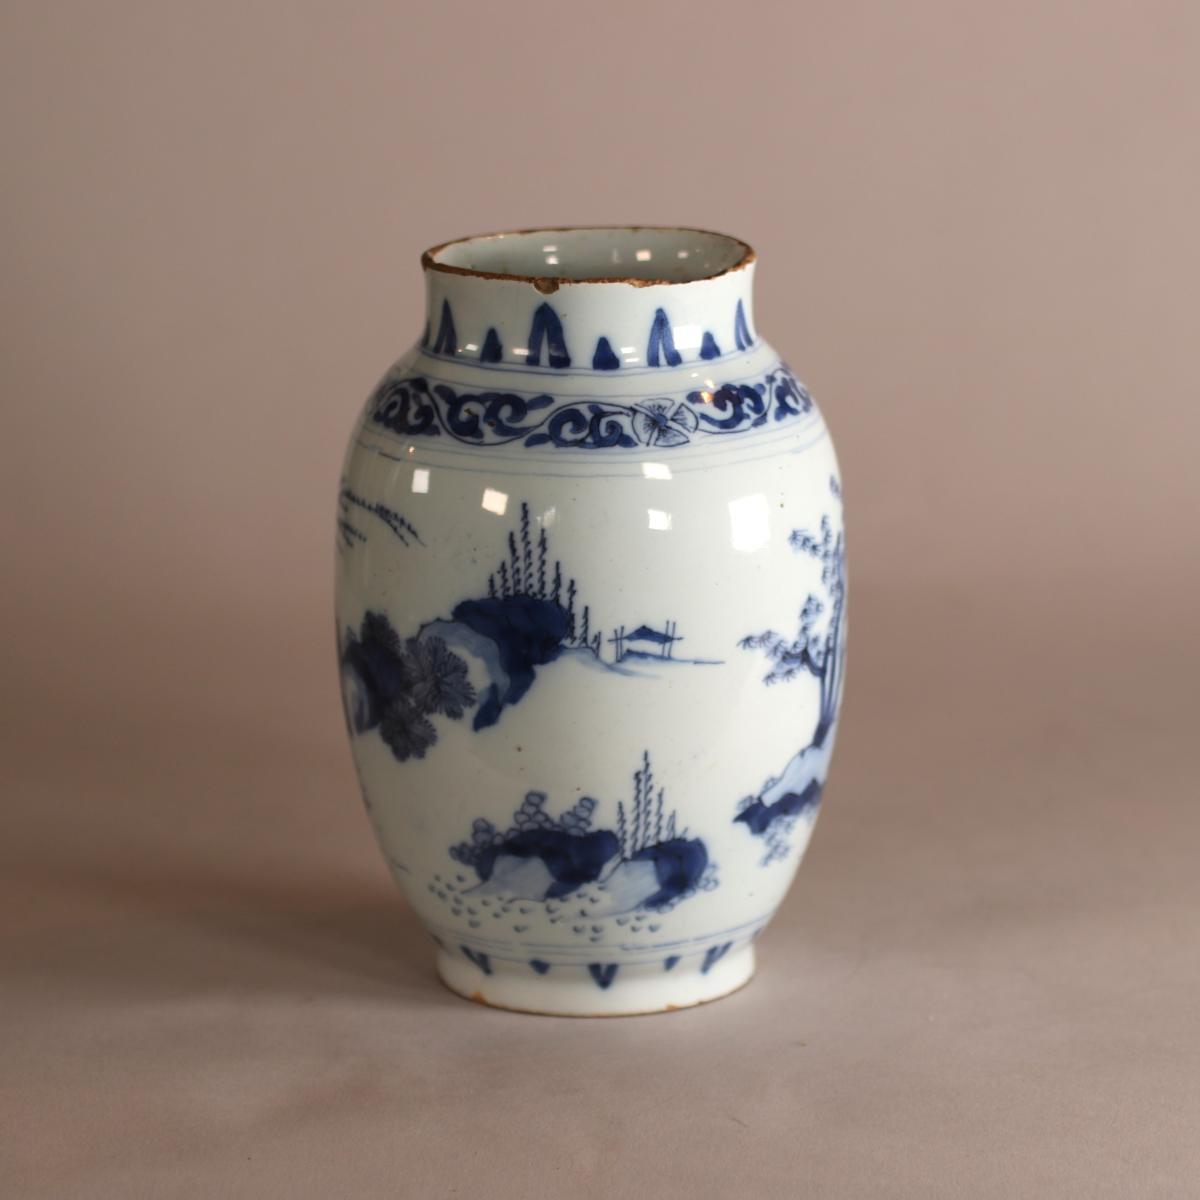 Side of Dutch Delft vase in the Chongzhen style